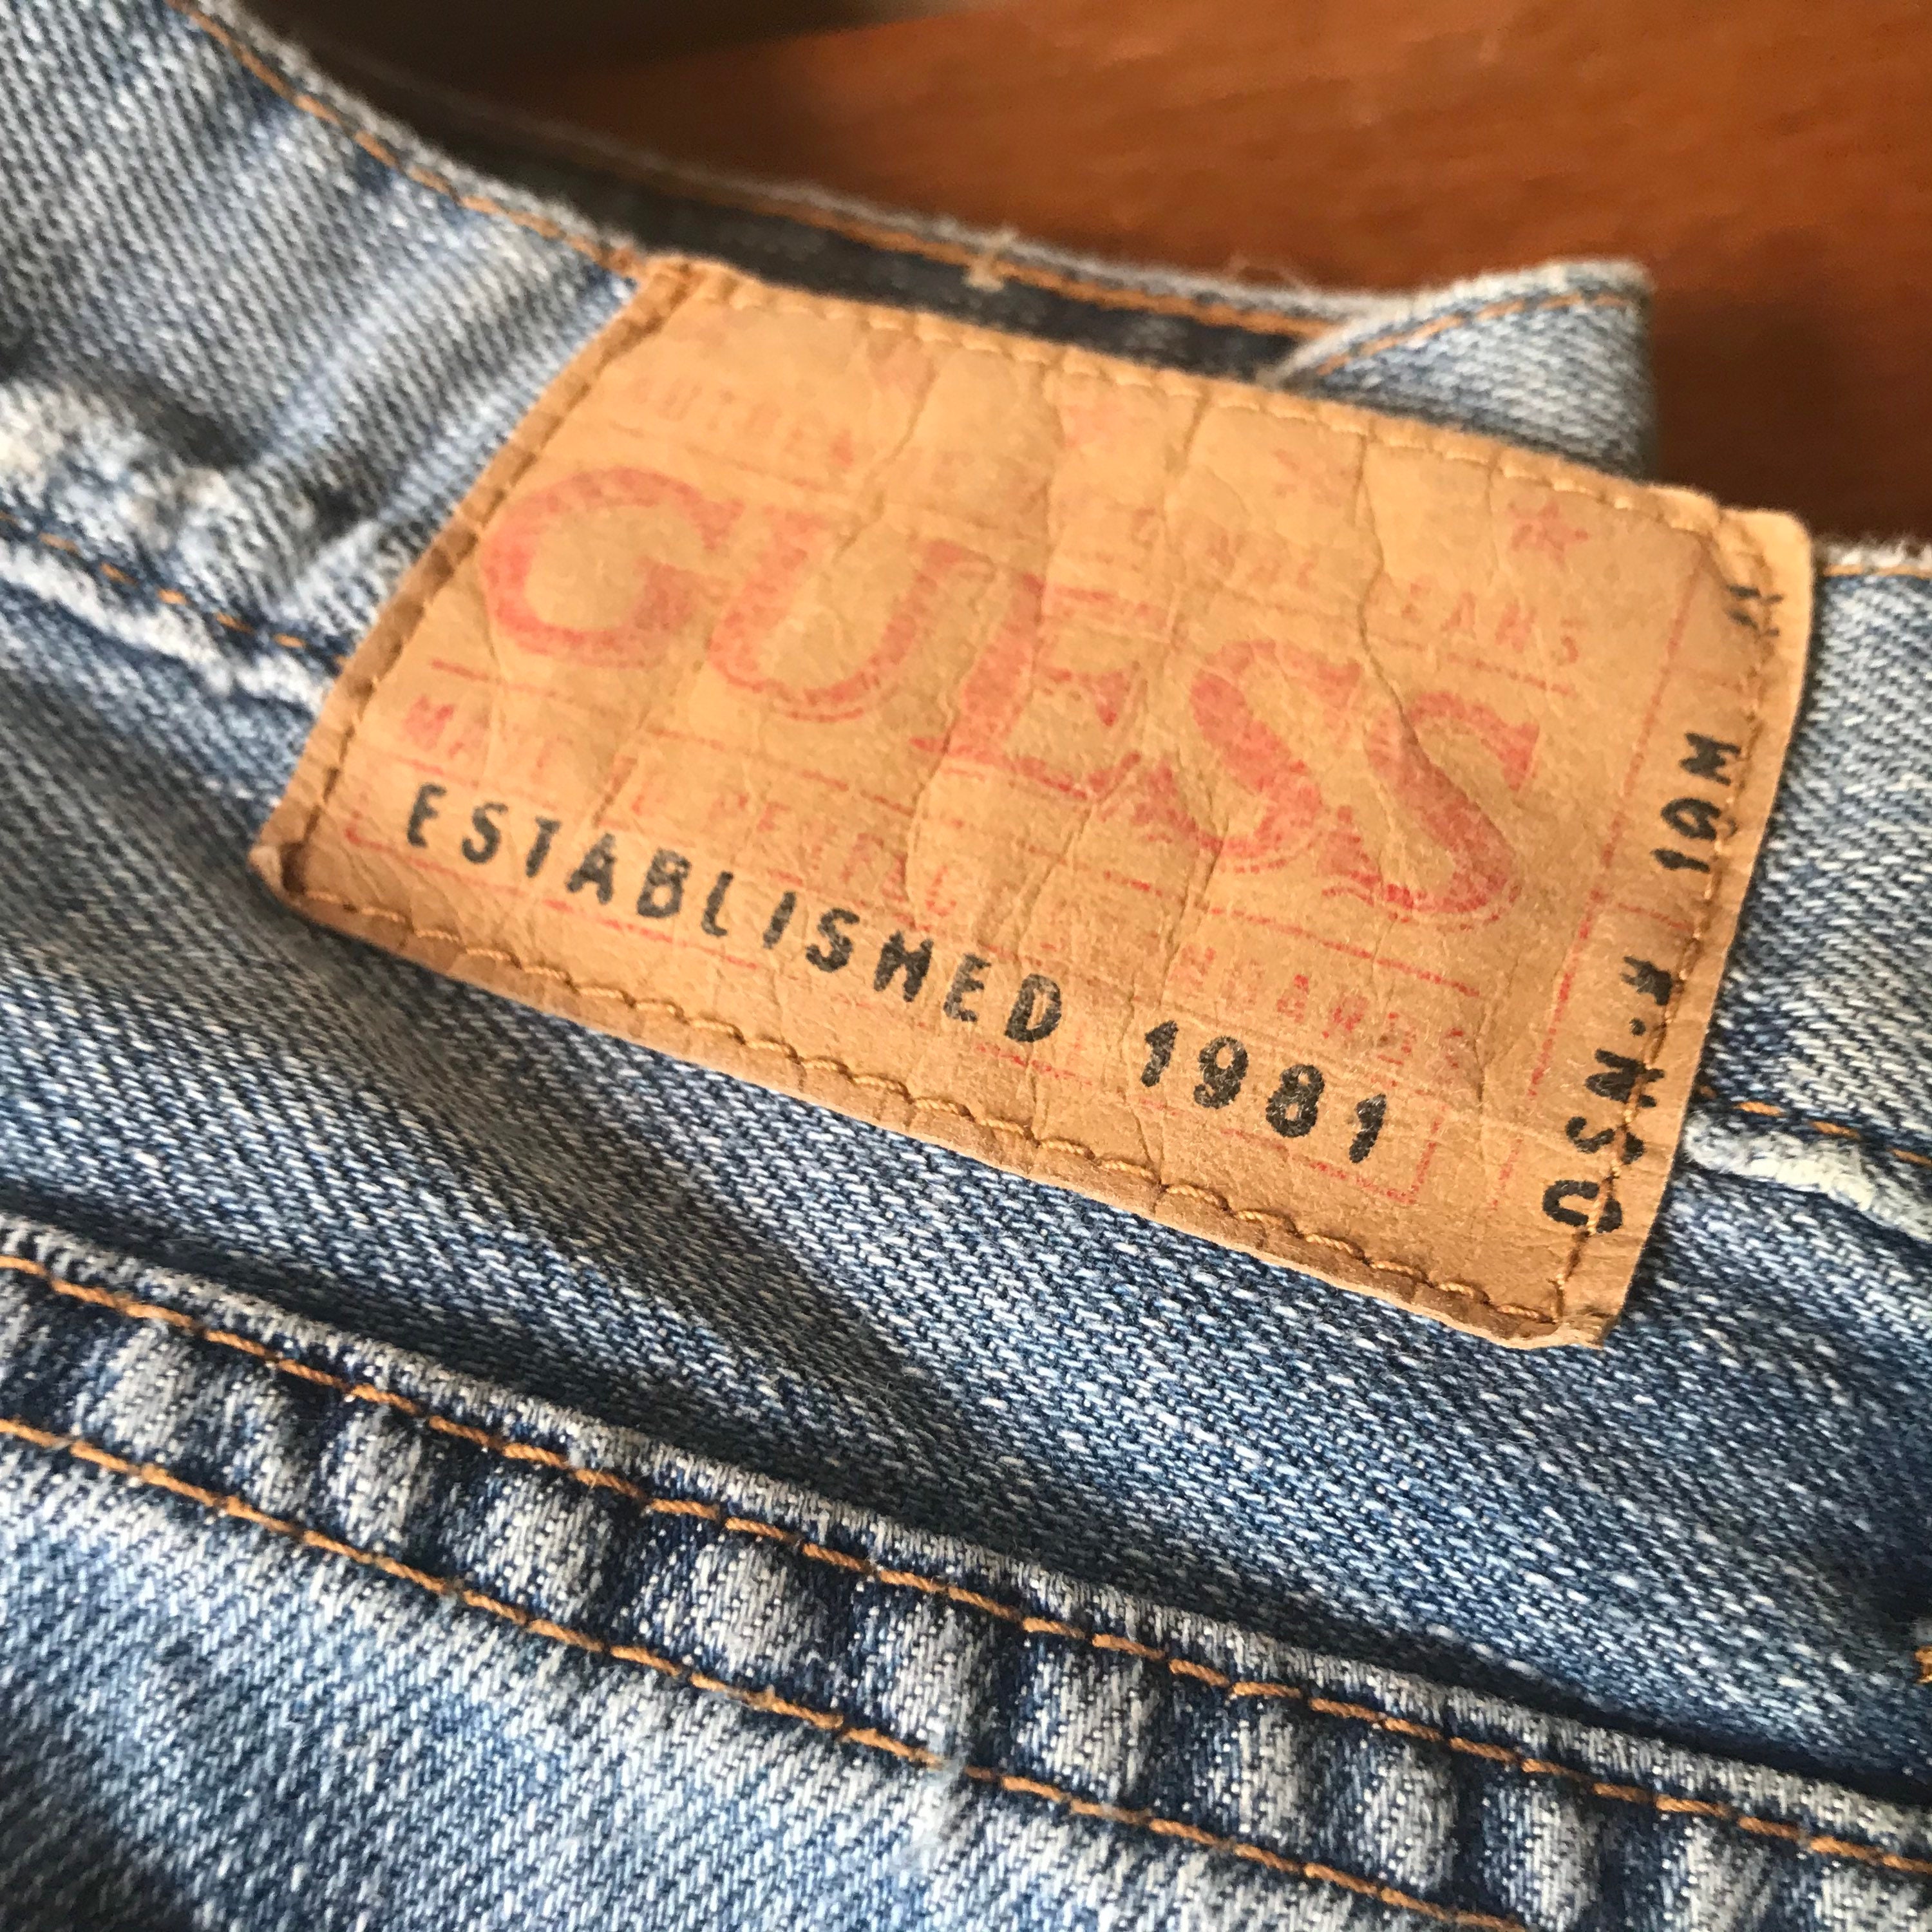 Mens Guess Jeans, Size 34, Vintage Guess Jeans, Distressed Bootcut Jeans,  Zipper Fly Jeans, 90's Jeans 